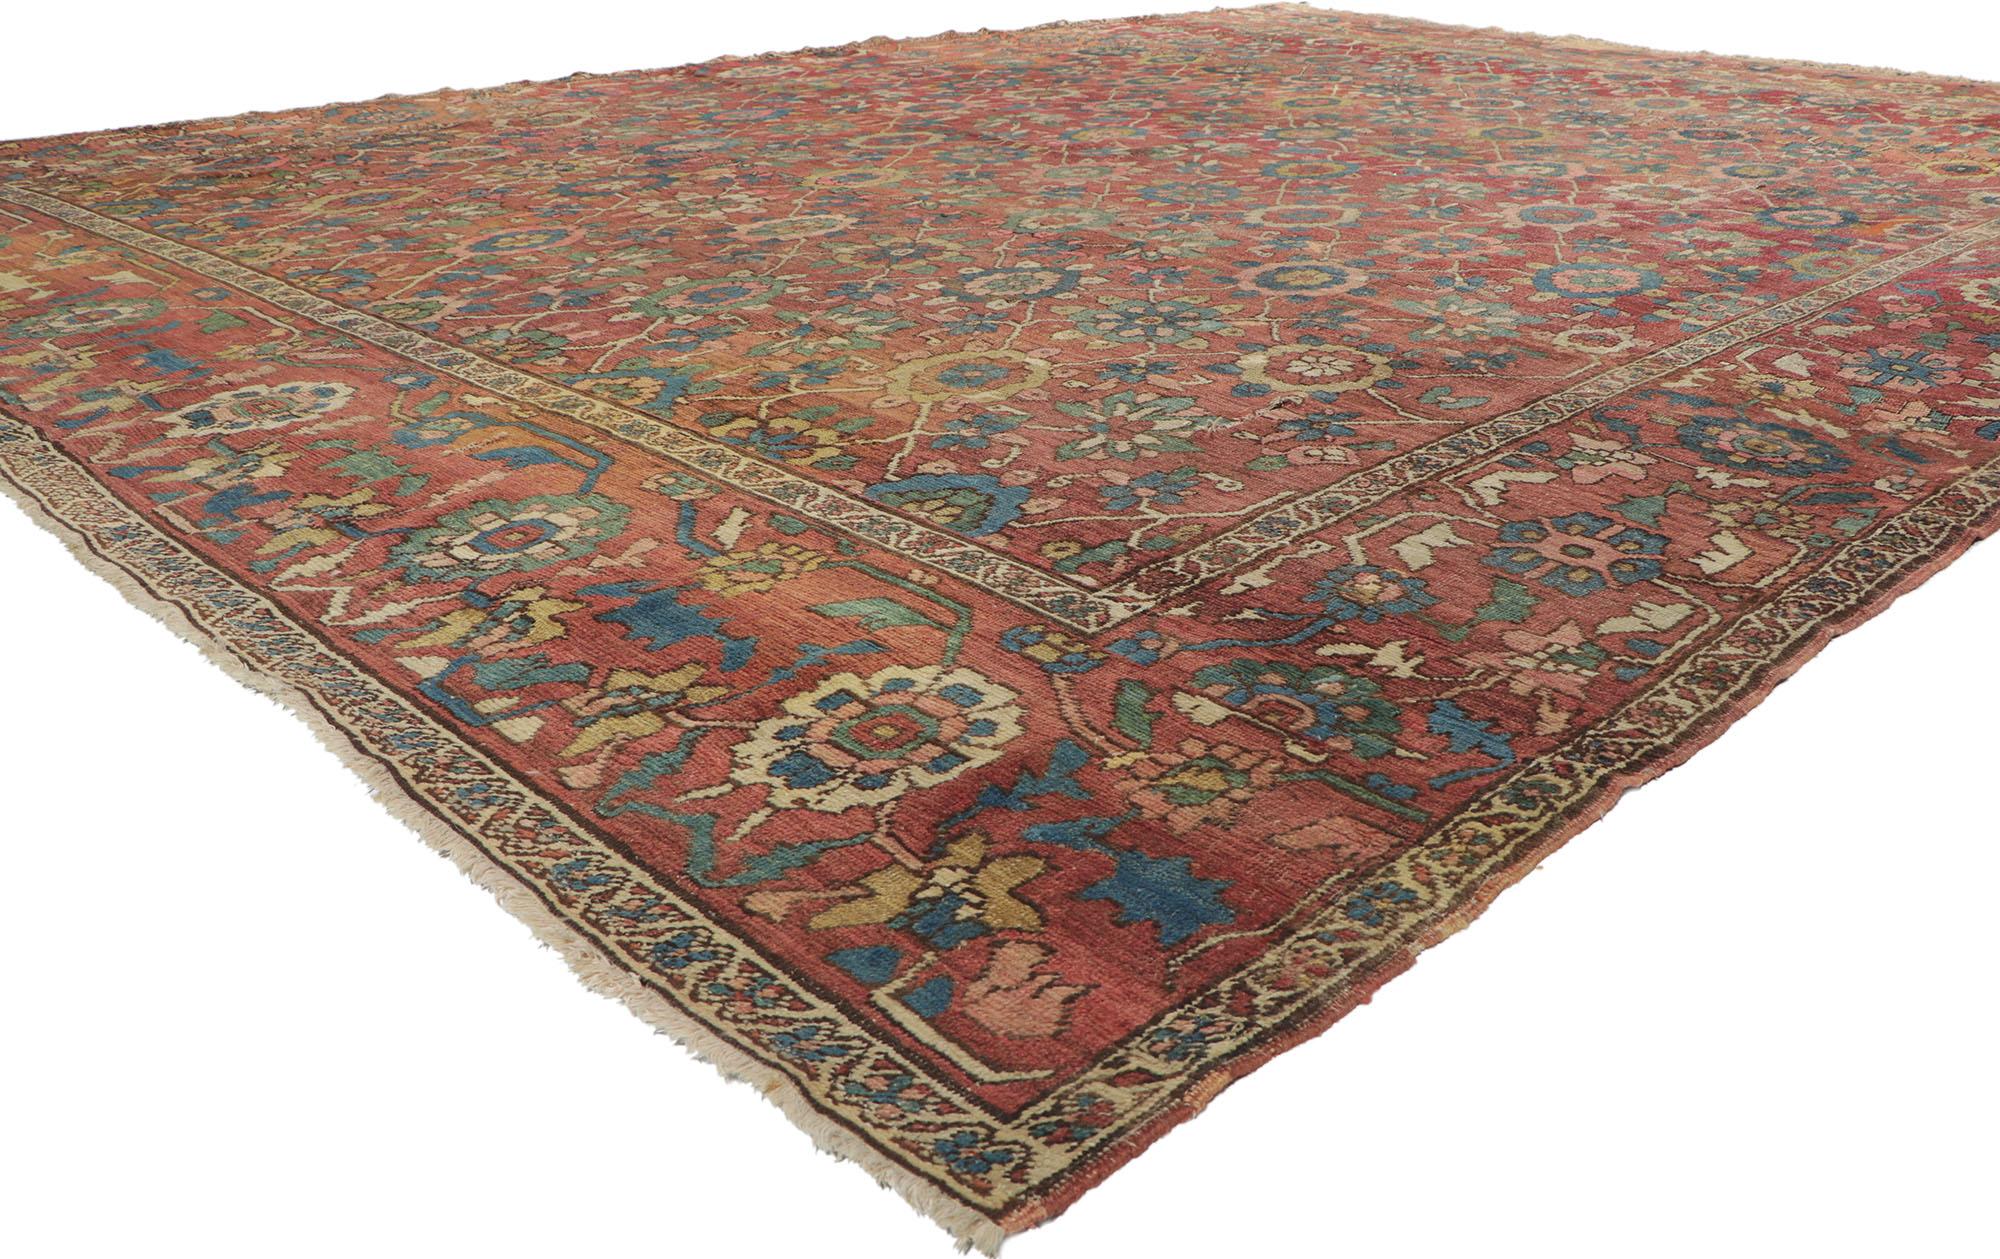 78290 Antique-Worn Persian Bakshaish Rug, 10'09 x 14'08.
Laid-back luxury meets nostalgic charm in this hand knotted wool antique-worn Persian Bakshaishh rug. The Herati design and rustic earthy hues woven into this piece work together resulting in